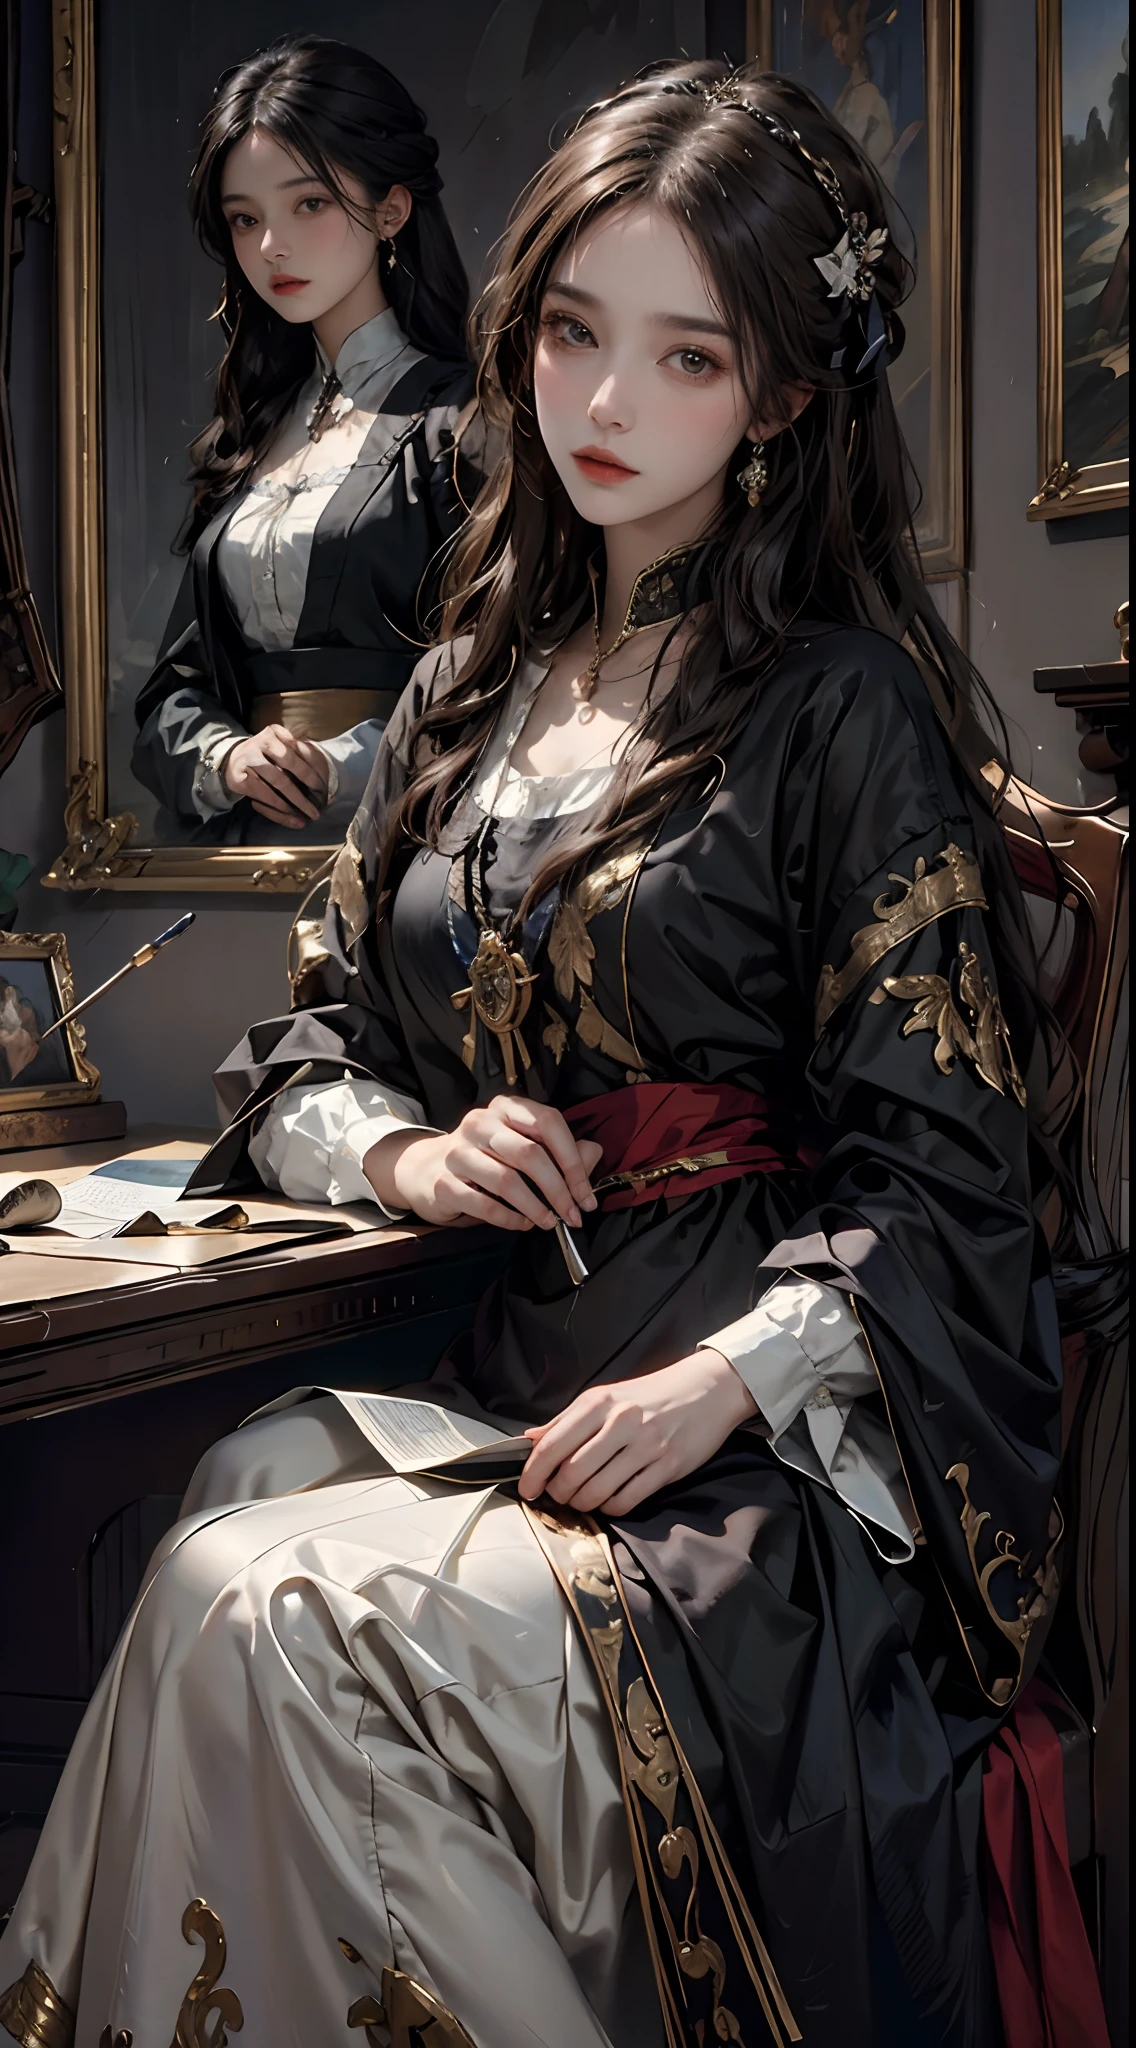 ((Masterpiece oil painting, Highest quality)), beautiful girl wearing renaissance clothing sitting at dressing table, chiaroscuro, light and shadow.